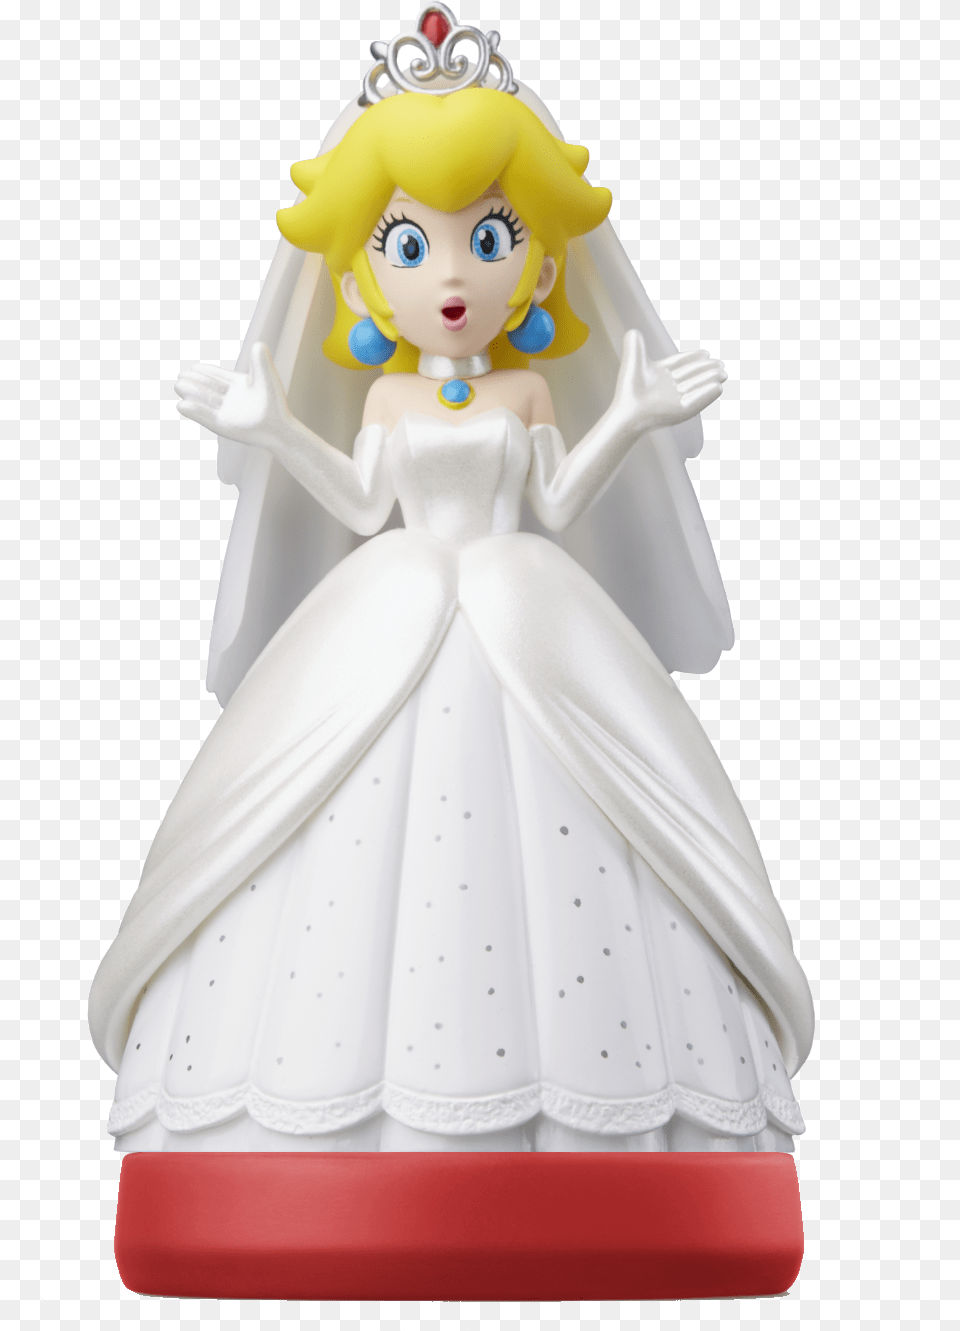 Metroid Fire Emblem Amp Botw Champions Amiibo And A Super Mario Odyssey Peach Wedding Dress, Doll, Figurine, Toy, Face Free Transparent Png